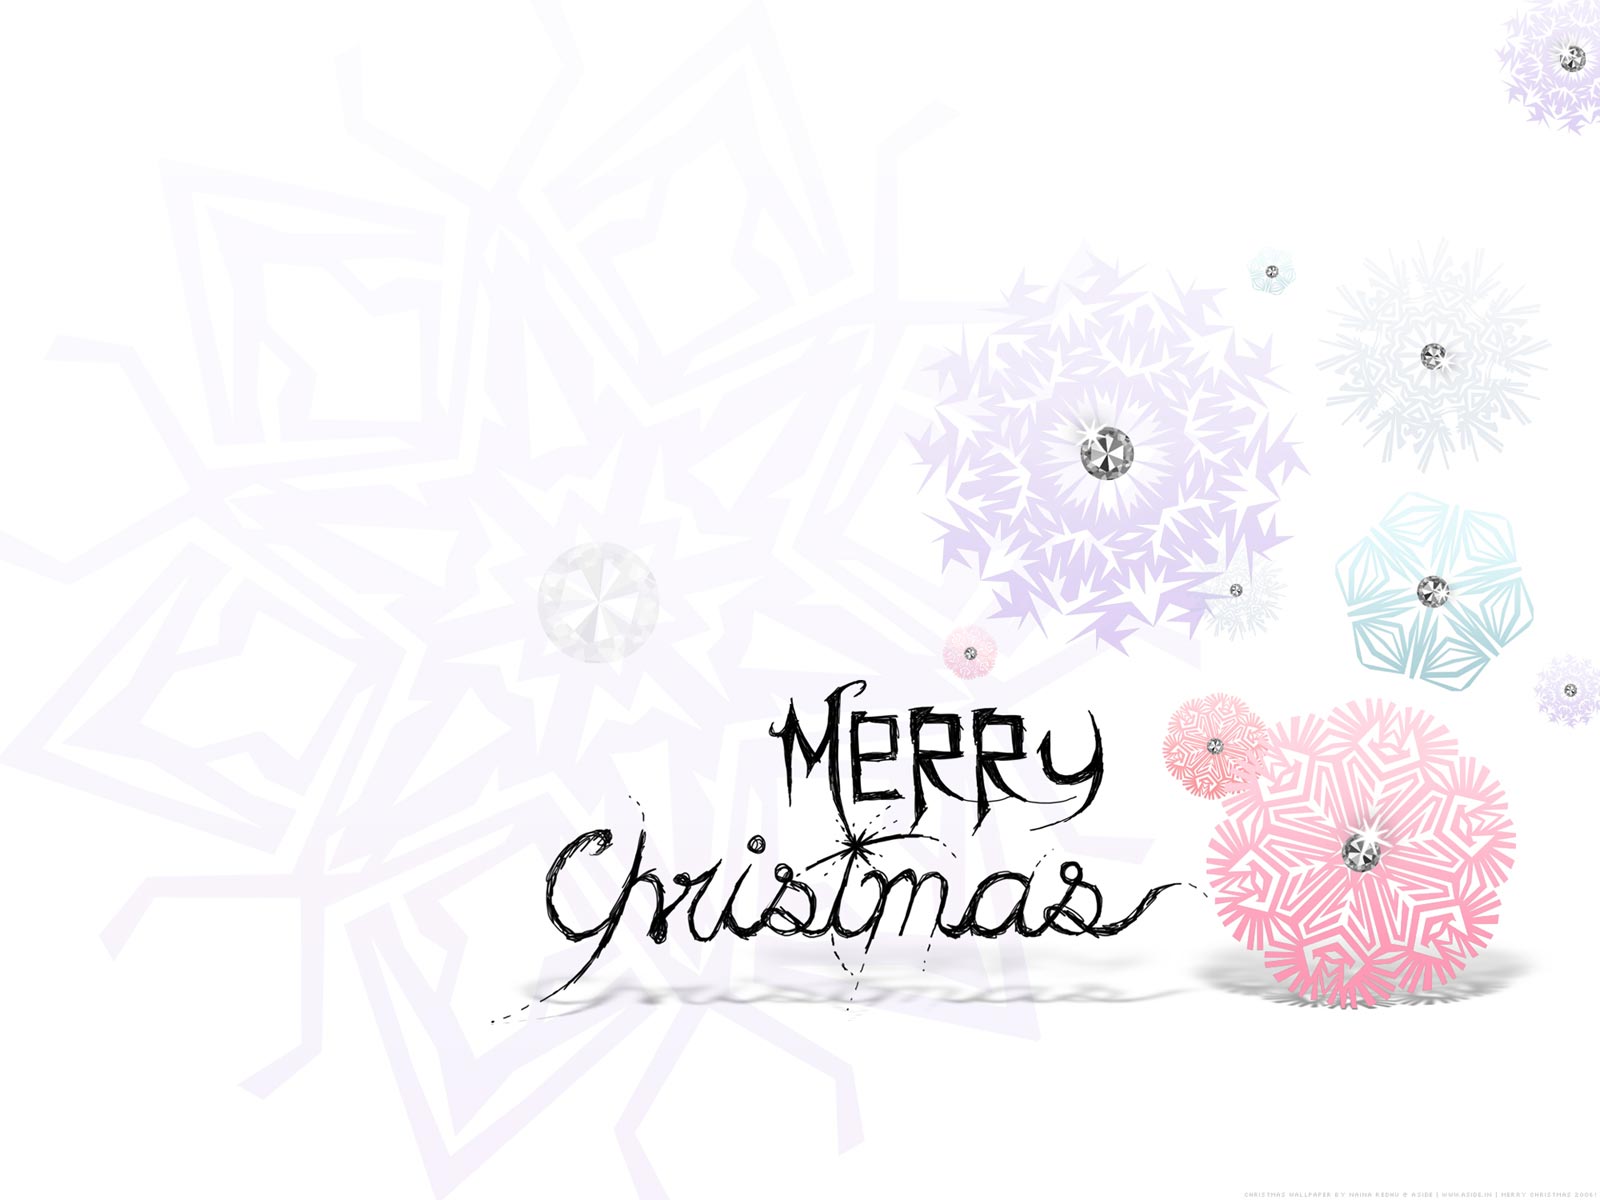 Free Download Cute Christmas Wallpapers